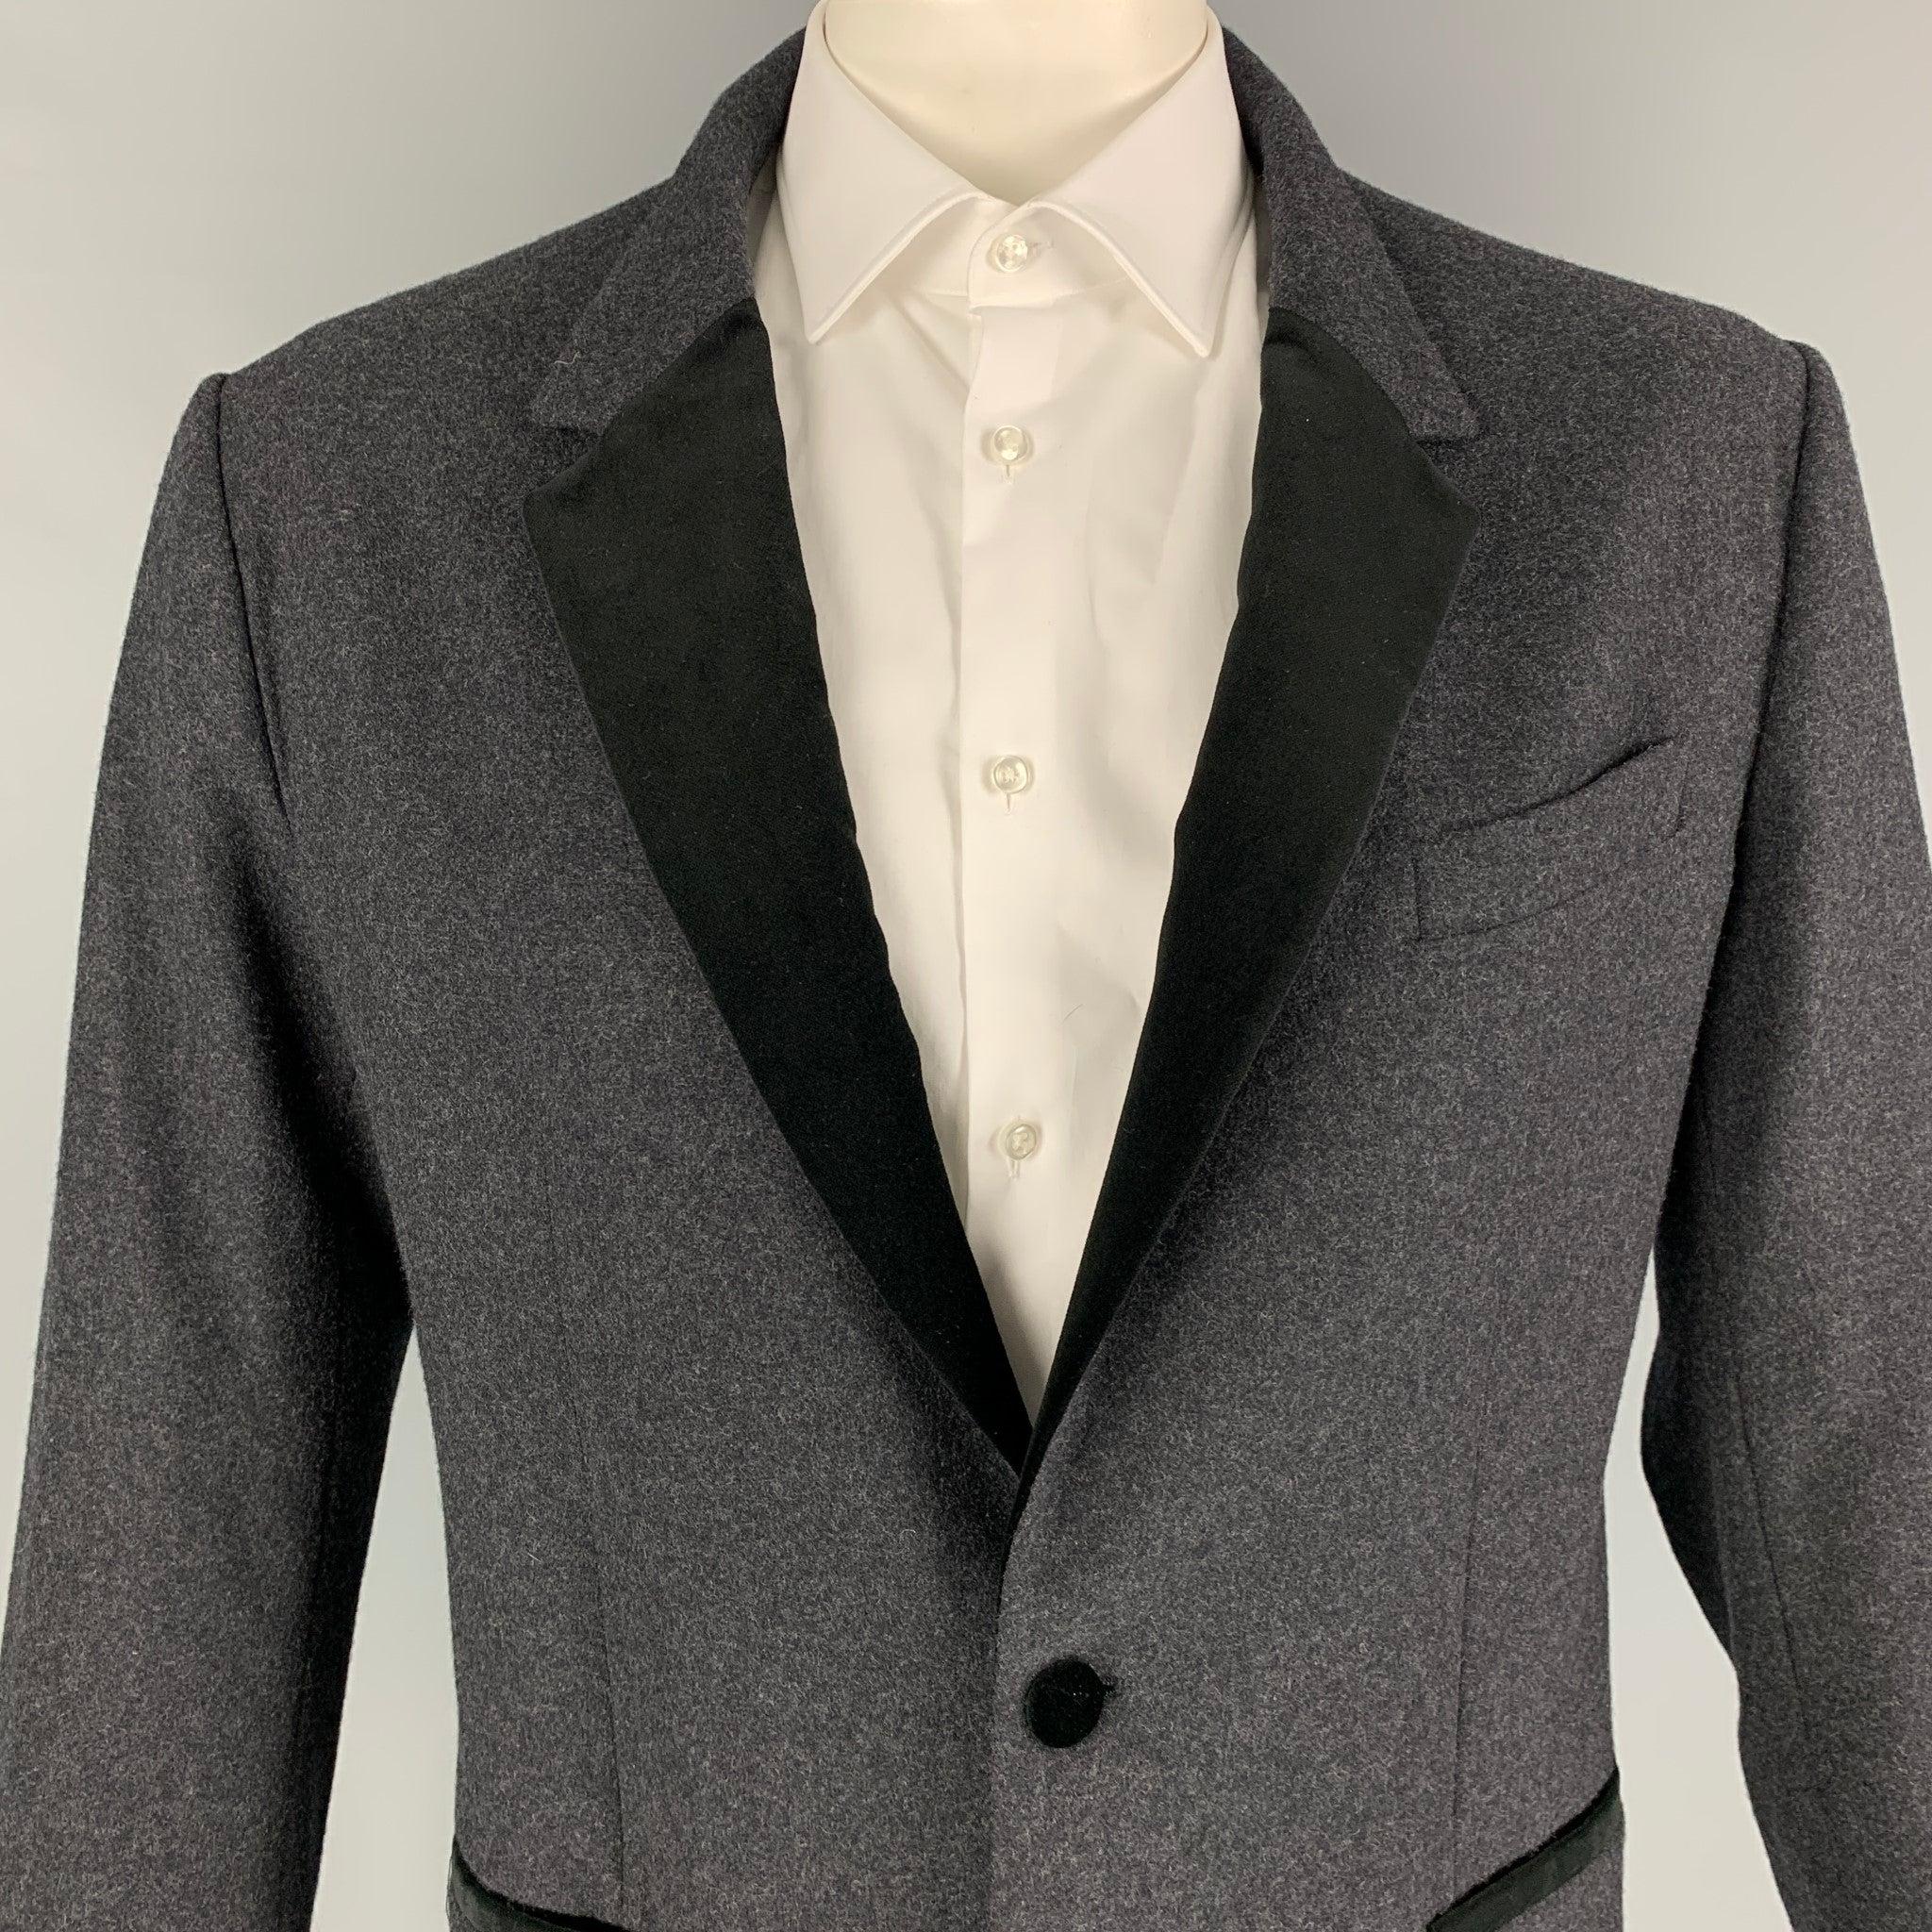 DOLCE & GABBANA sport coat comes in a charcoal & black wool with a velvet trim featuring a notch lapel, slit pockets, double back vent, and a double button closure. Made in Italy.
Excellent
Pre-Owned Condition. 

Marked:   54 

Measurements: 
